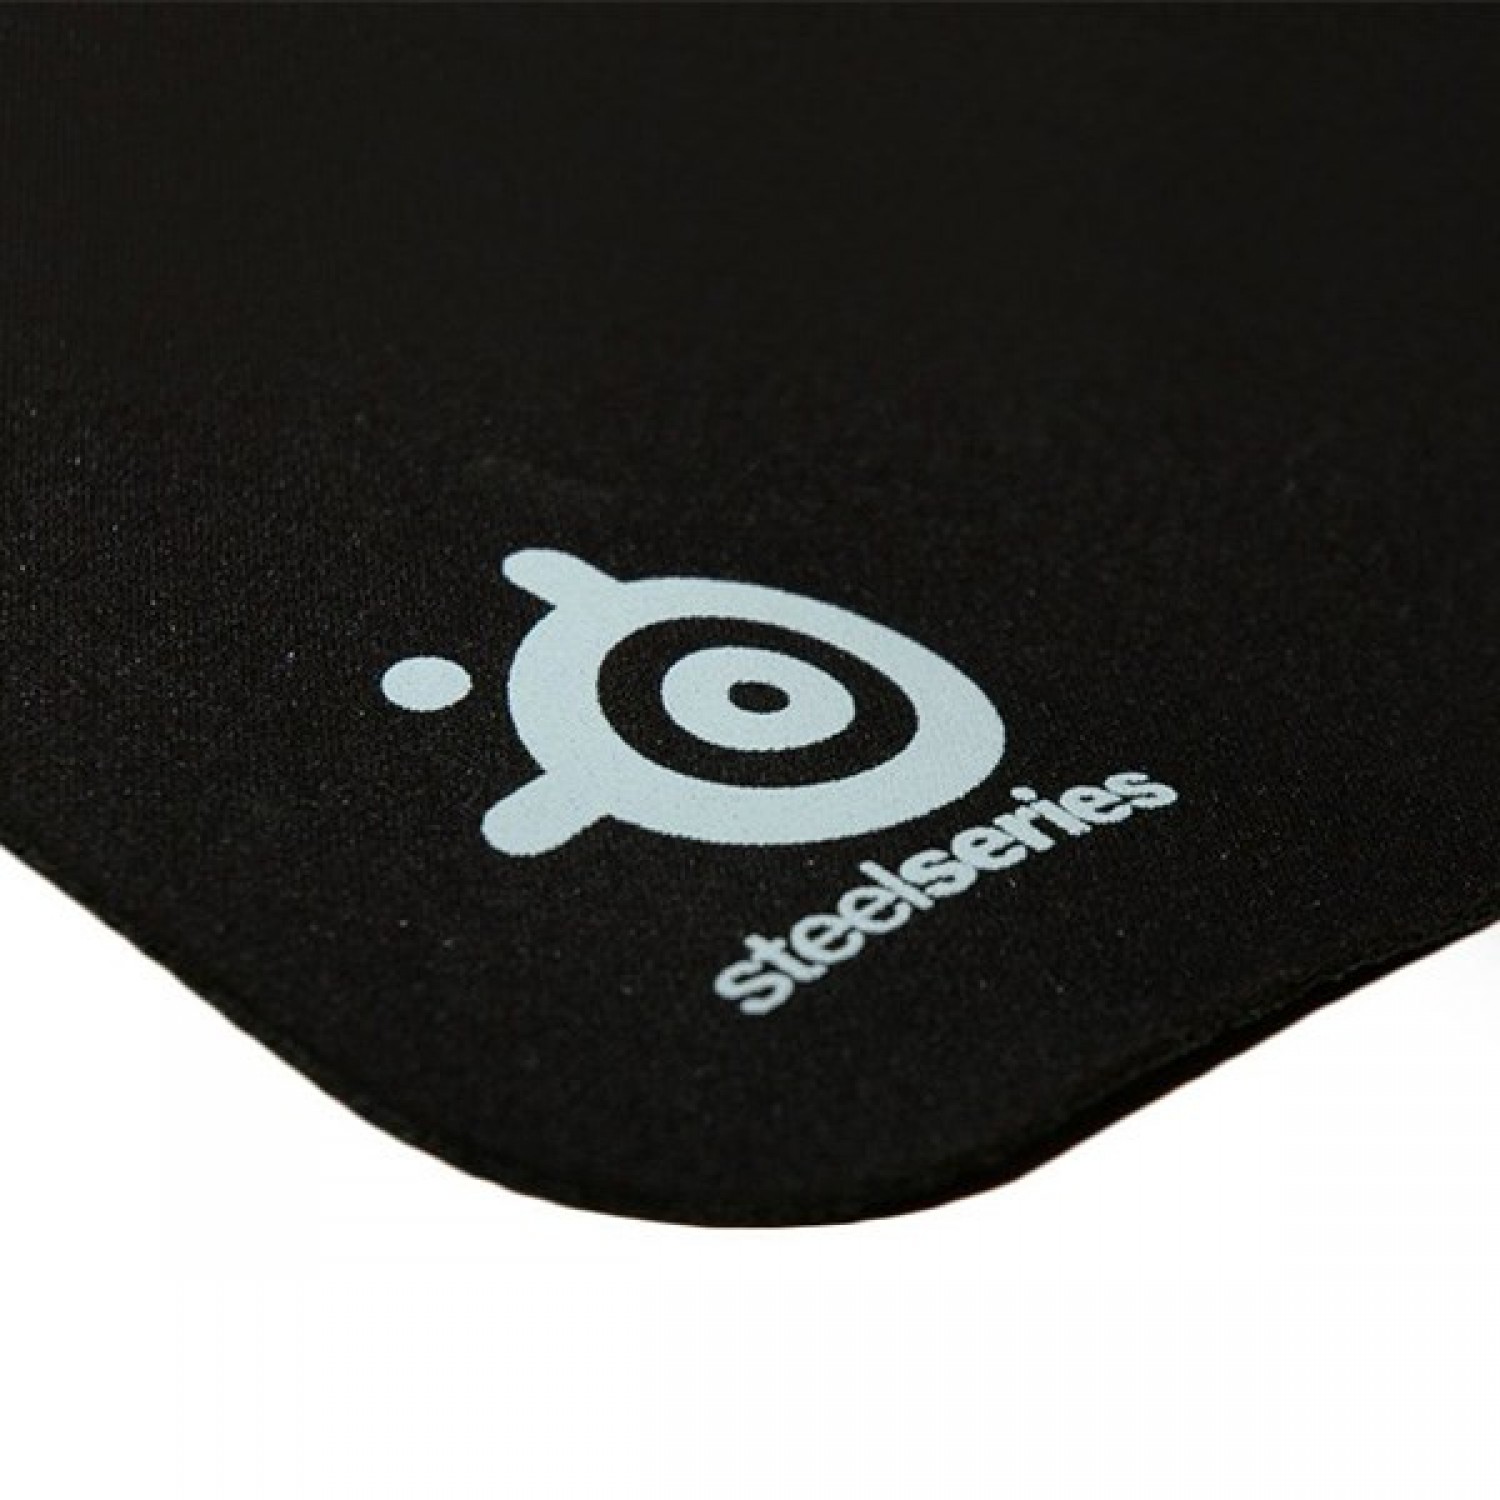 Steelseries Mouse pad Qck Mini-3